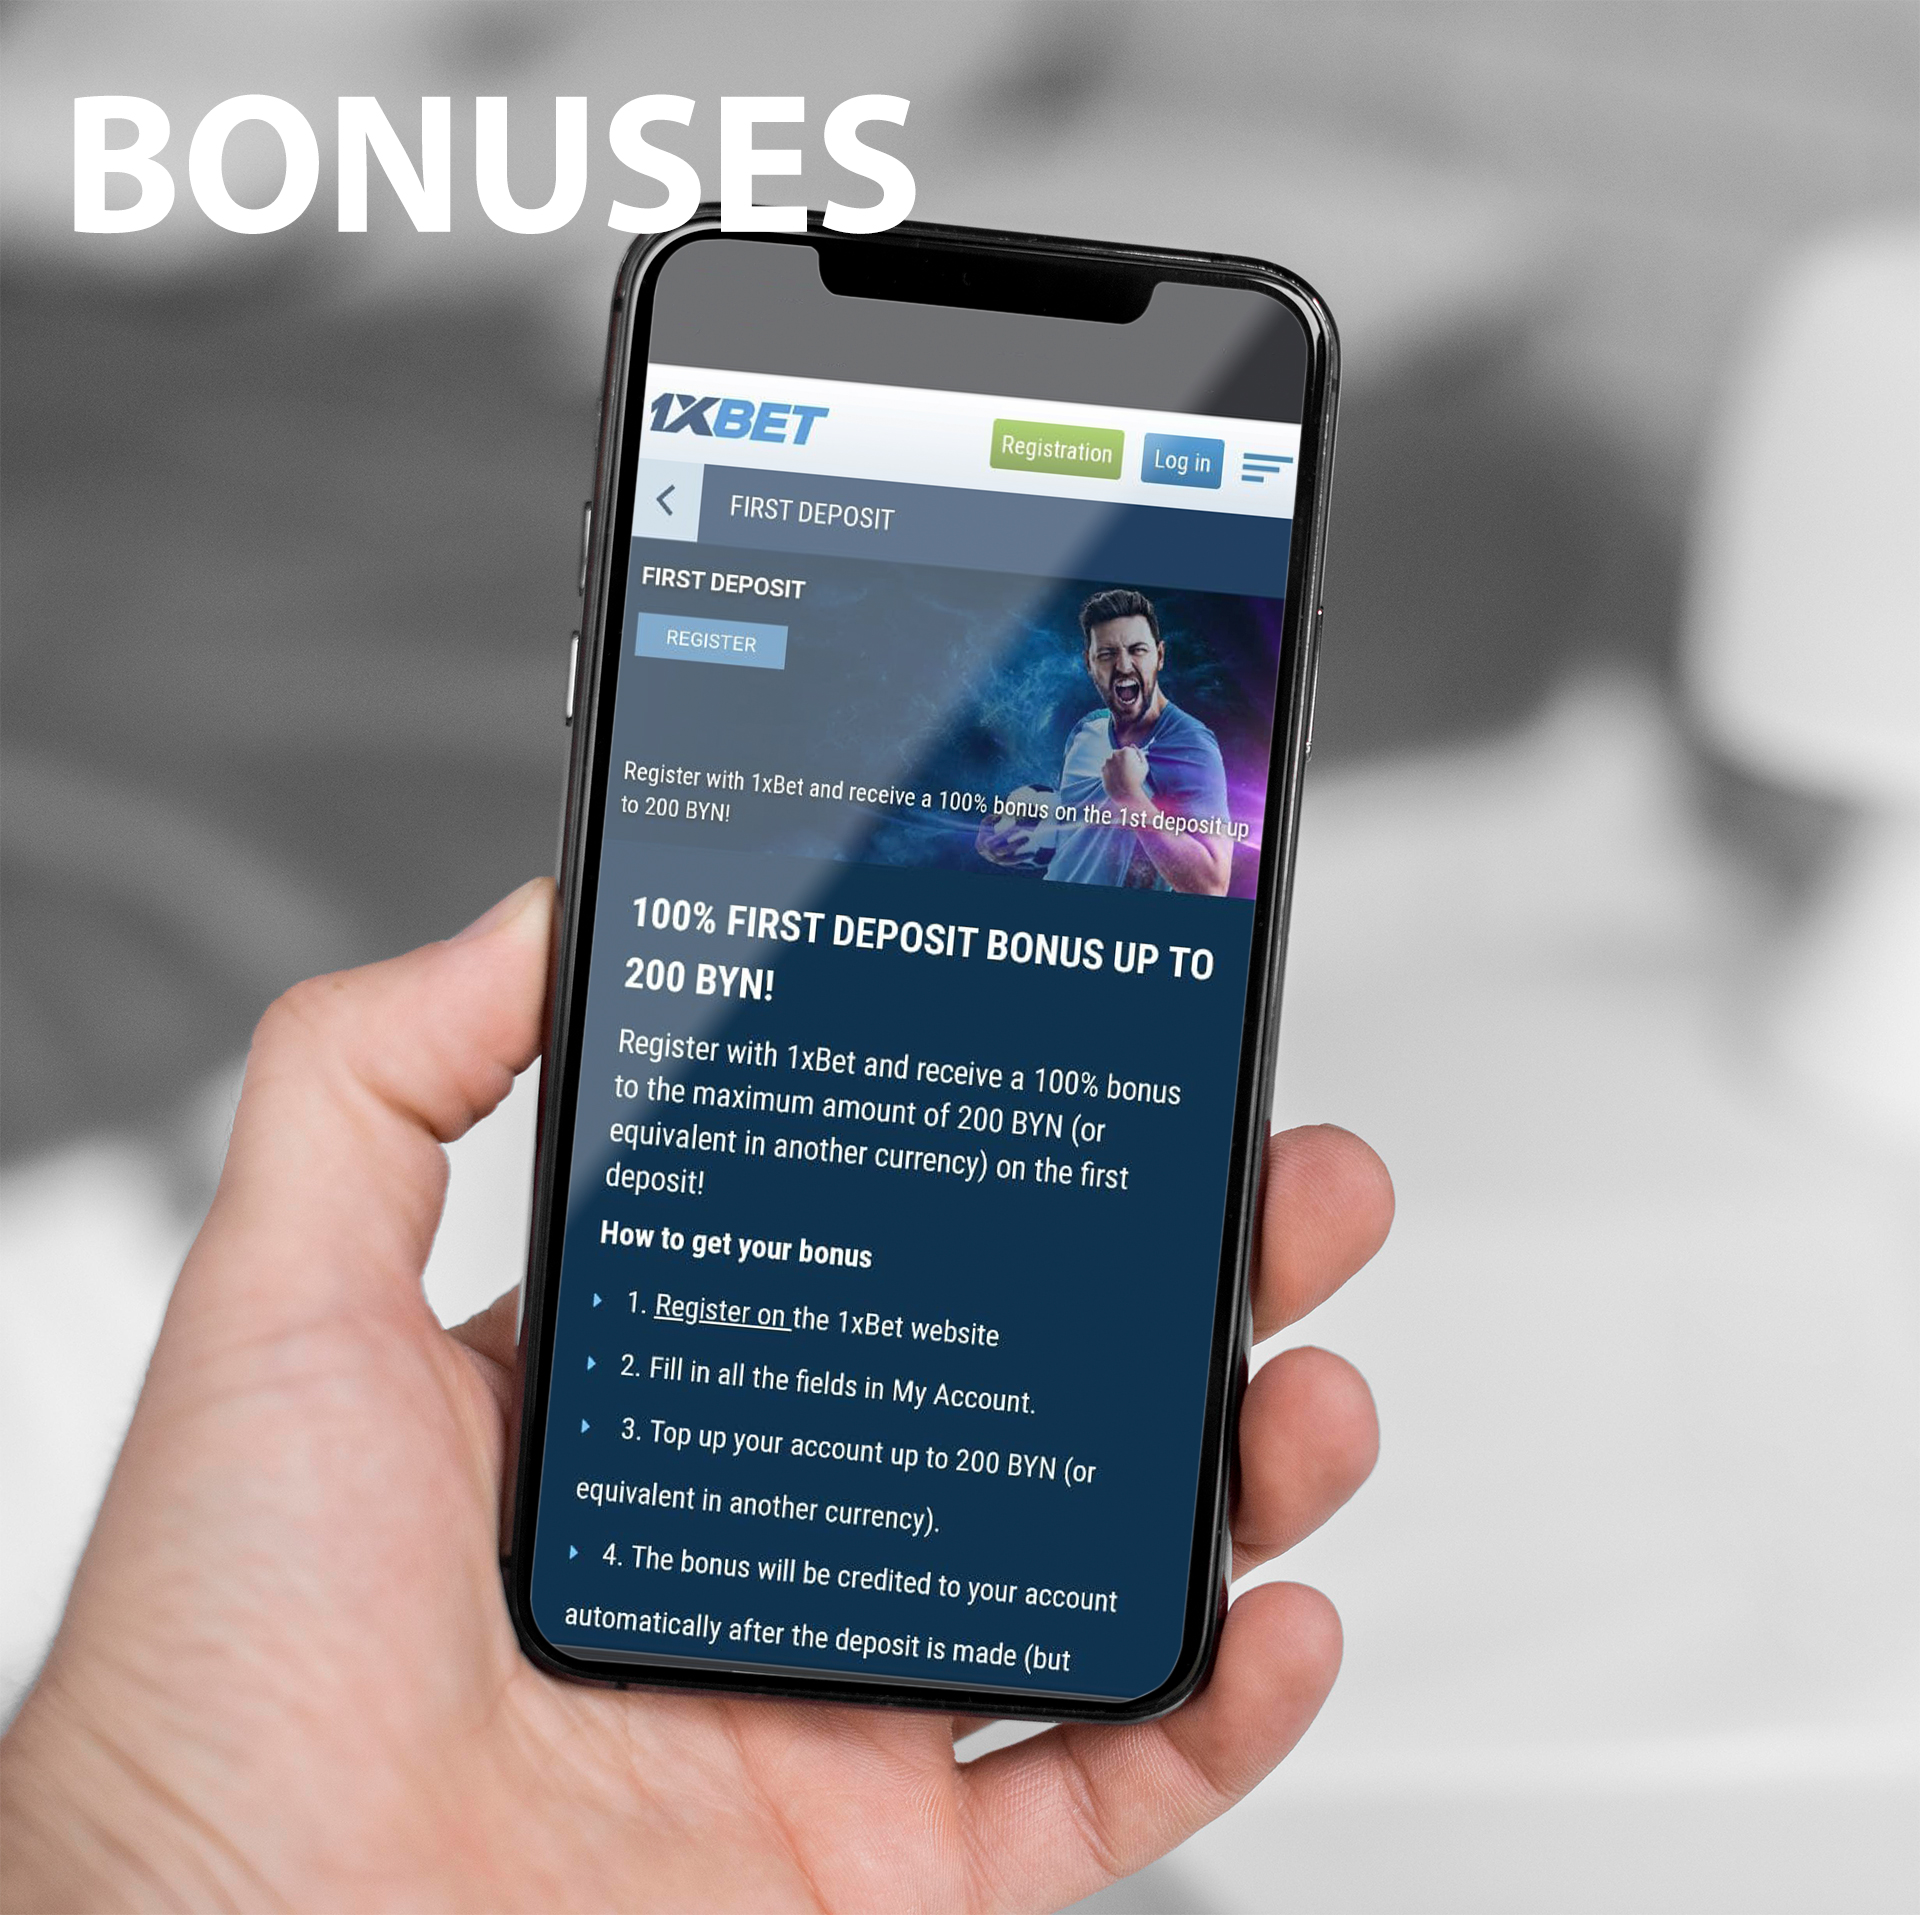 YOu can get welcome bonus and other attractive bonuses and offers from 1xbet.